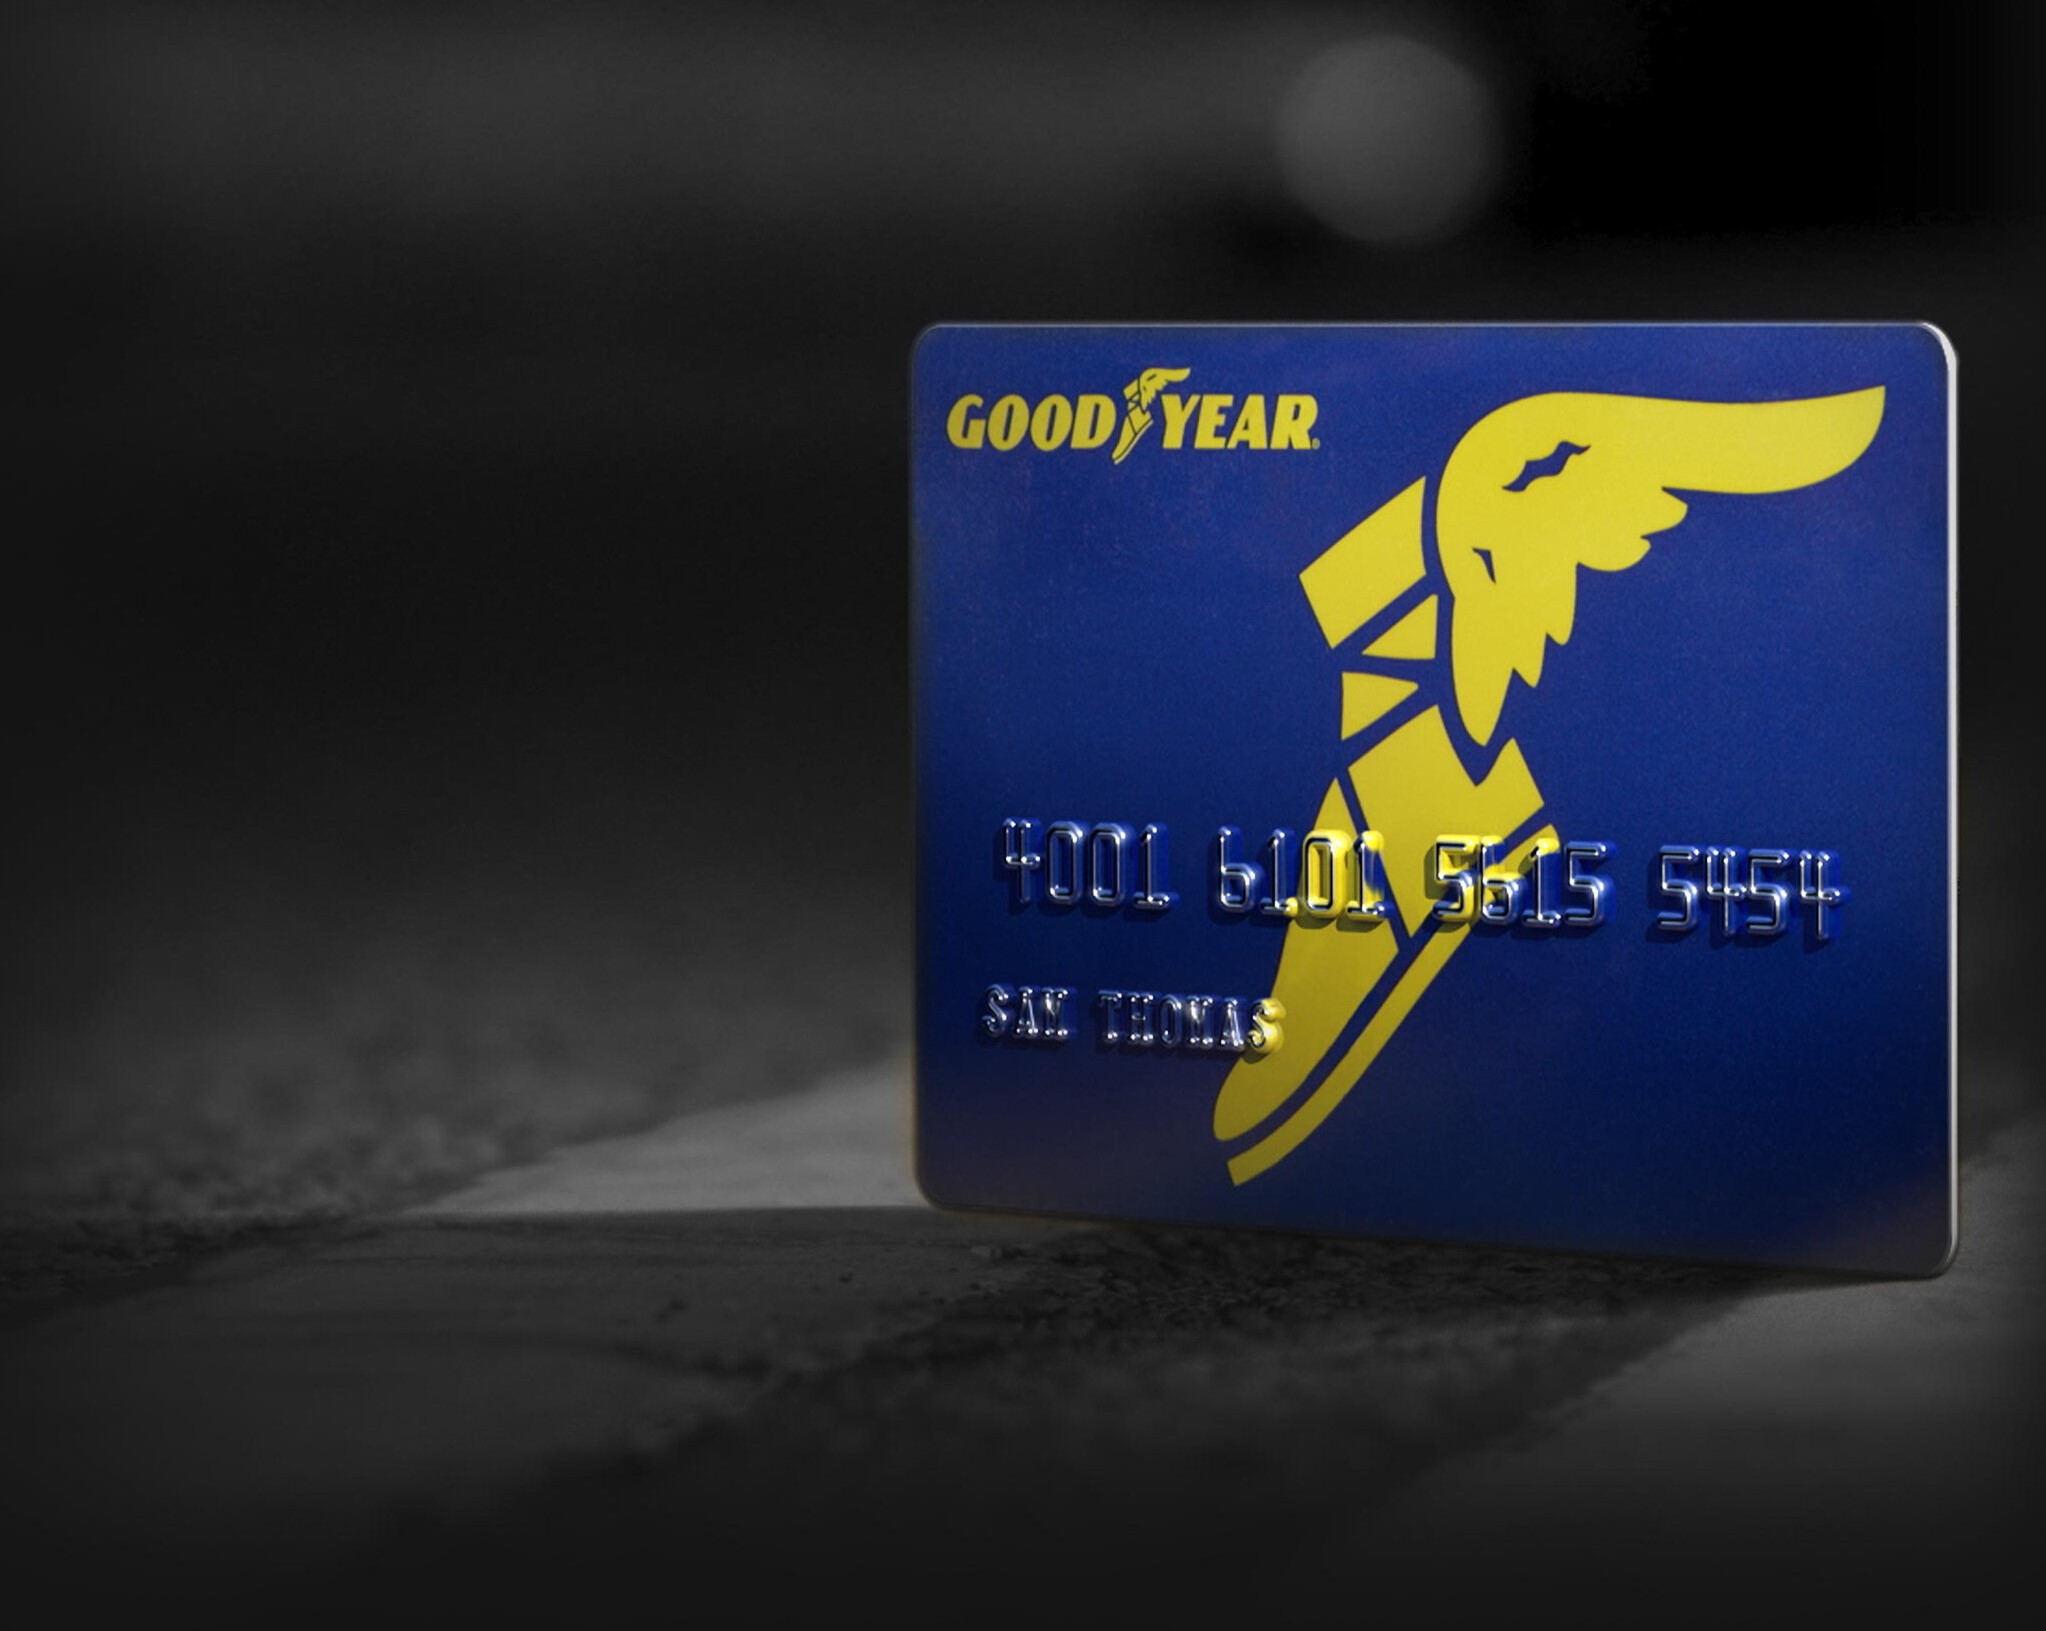 Where Can I Use My Goodyear Credit Card